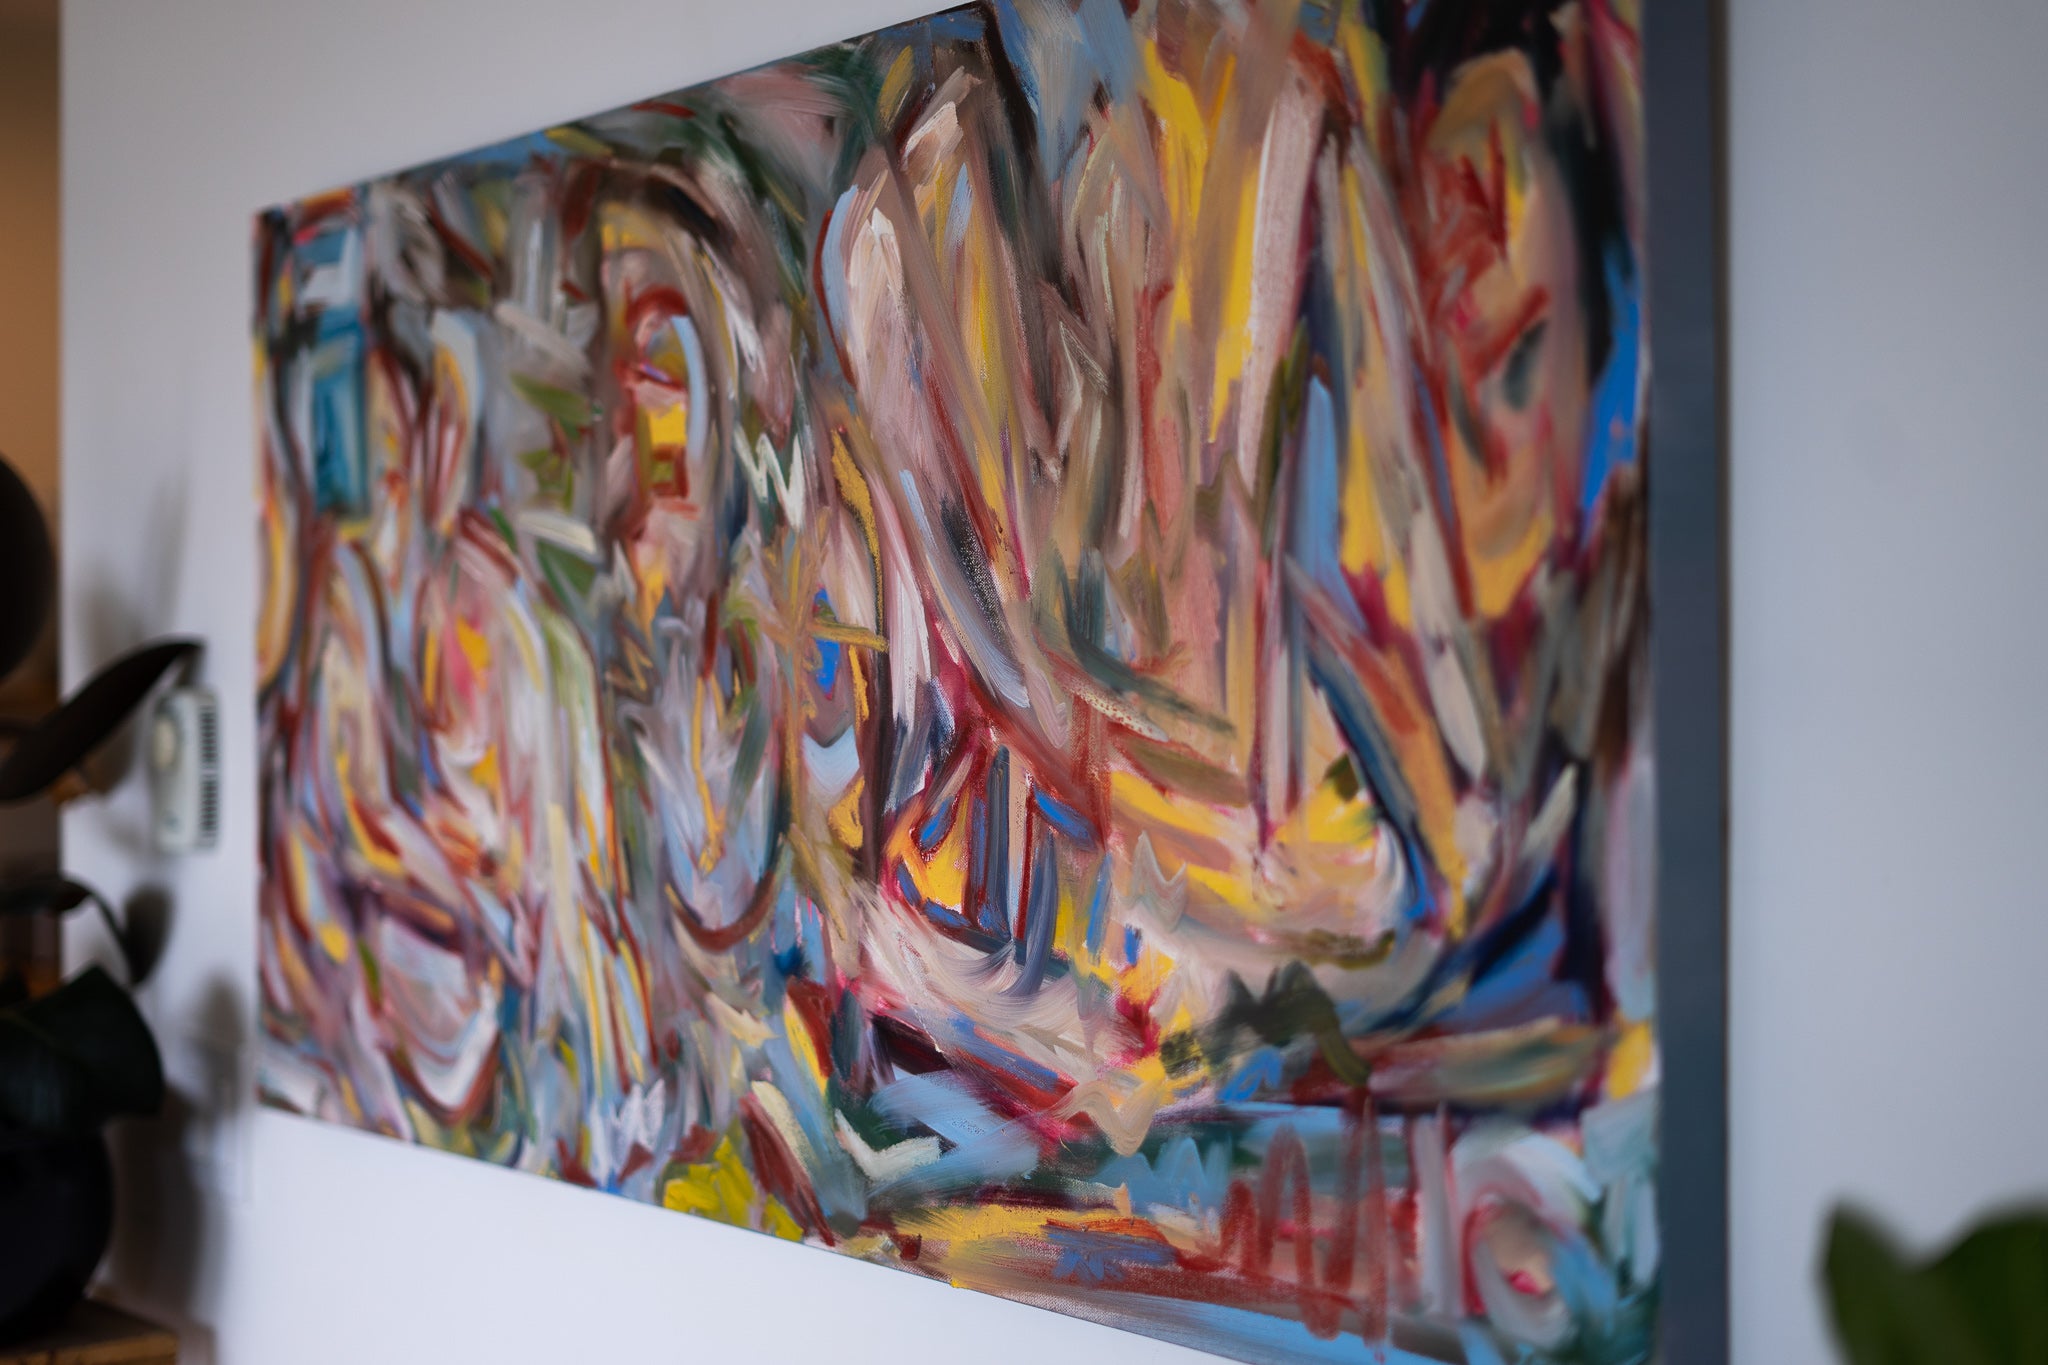 &quot;The Shape of You&quot;| 24 x 48 | Original Oil Painting on Canvas